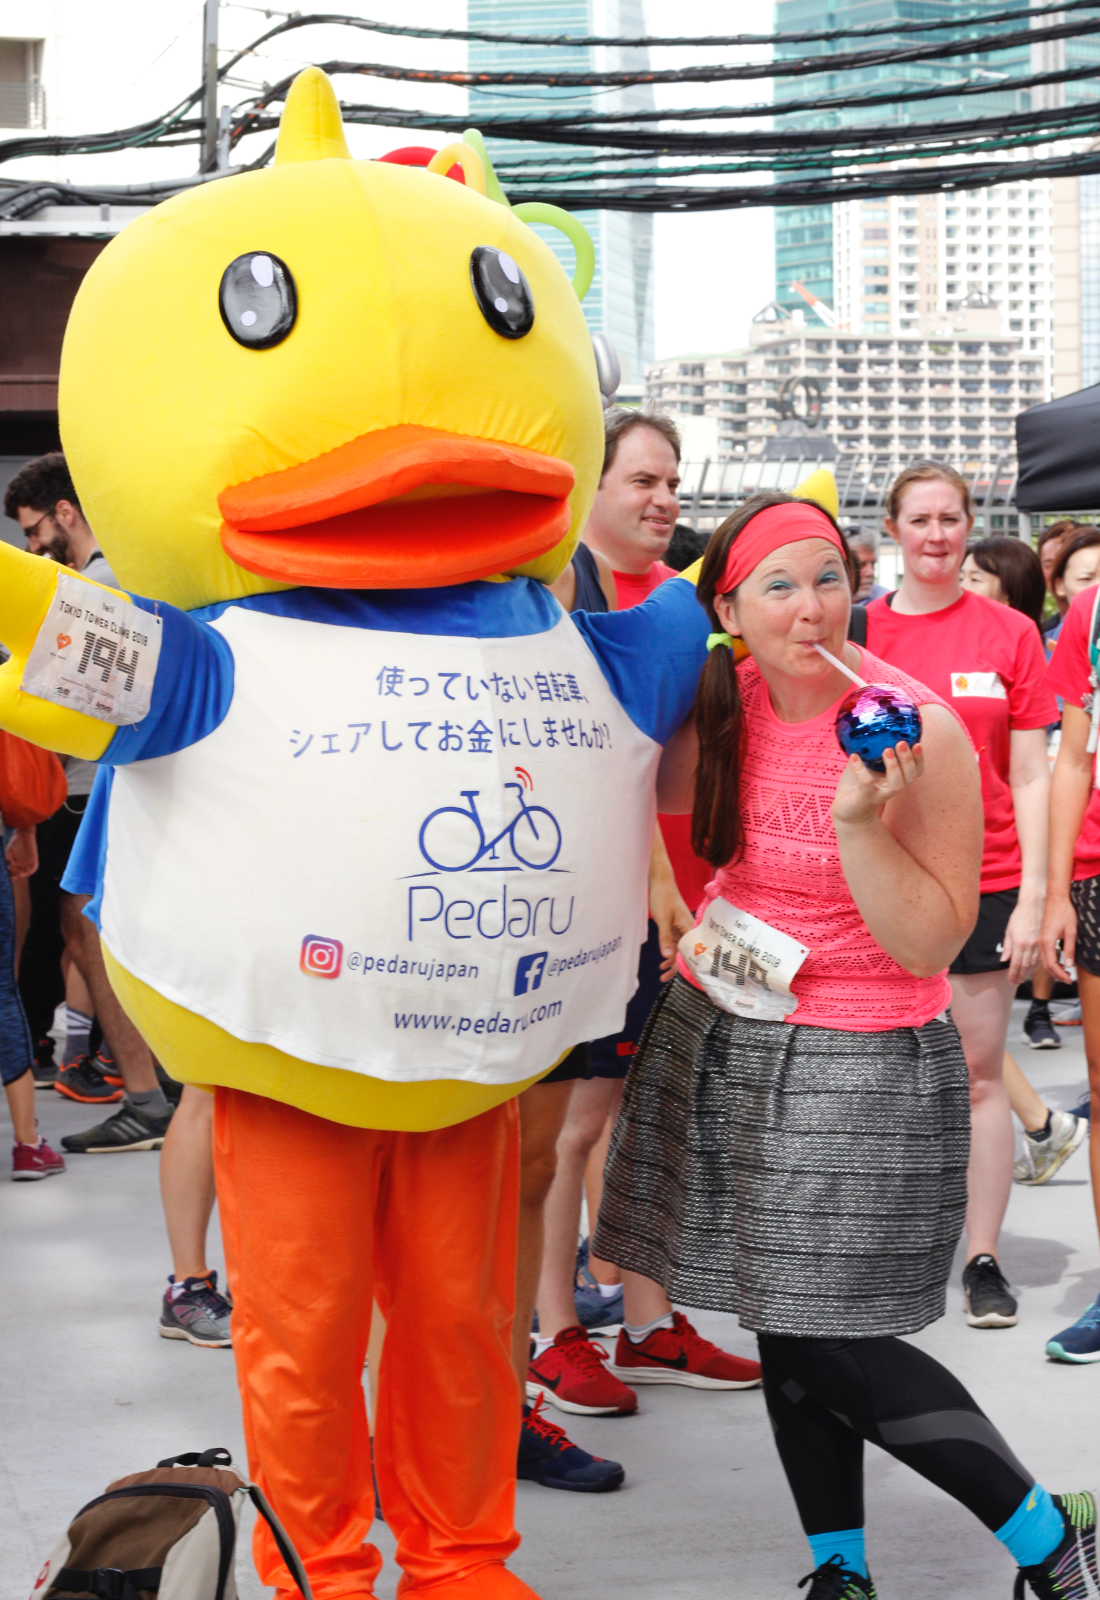 Fight Youth Suicides, Mental Health Stigma By Joining TELL's Tokyo Tower Climb 2019